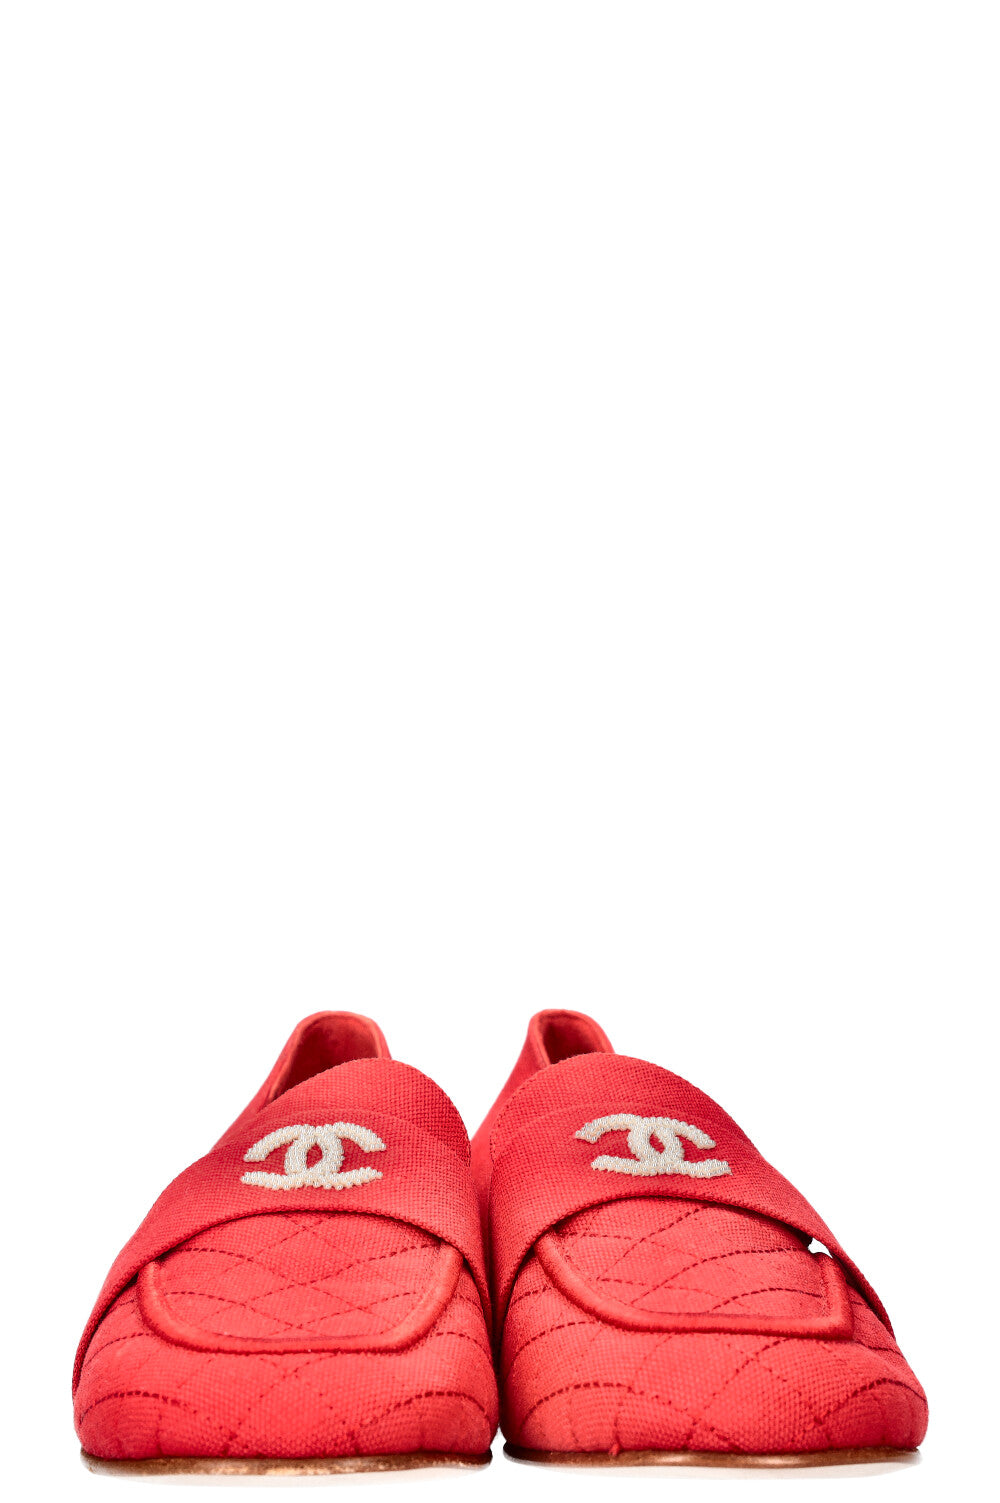 CHANEL Flats Diamond Quilted Canvas Red